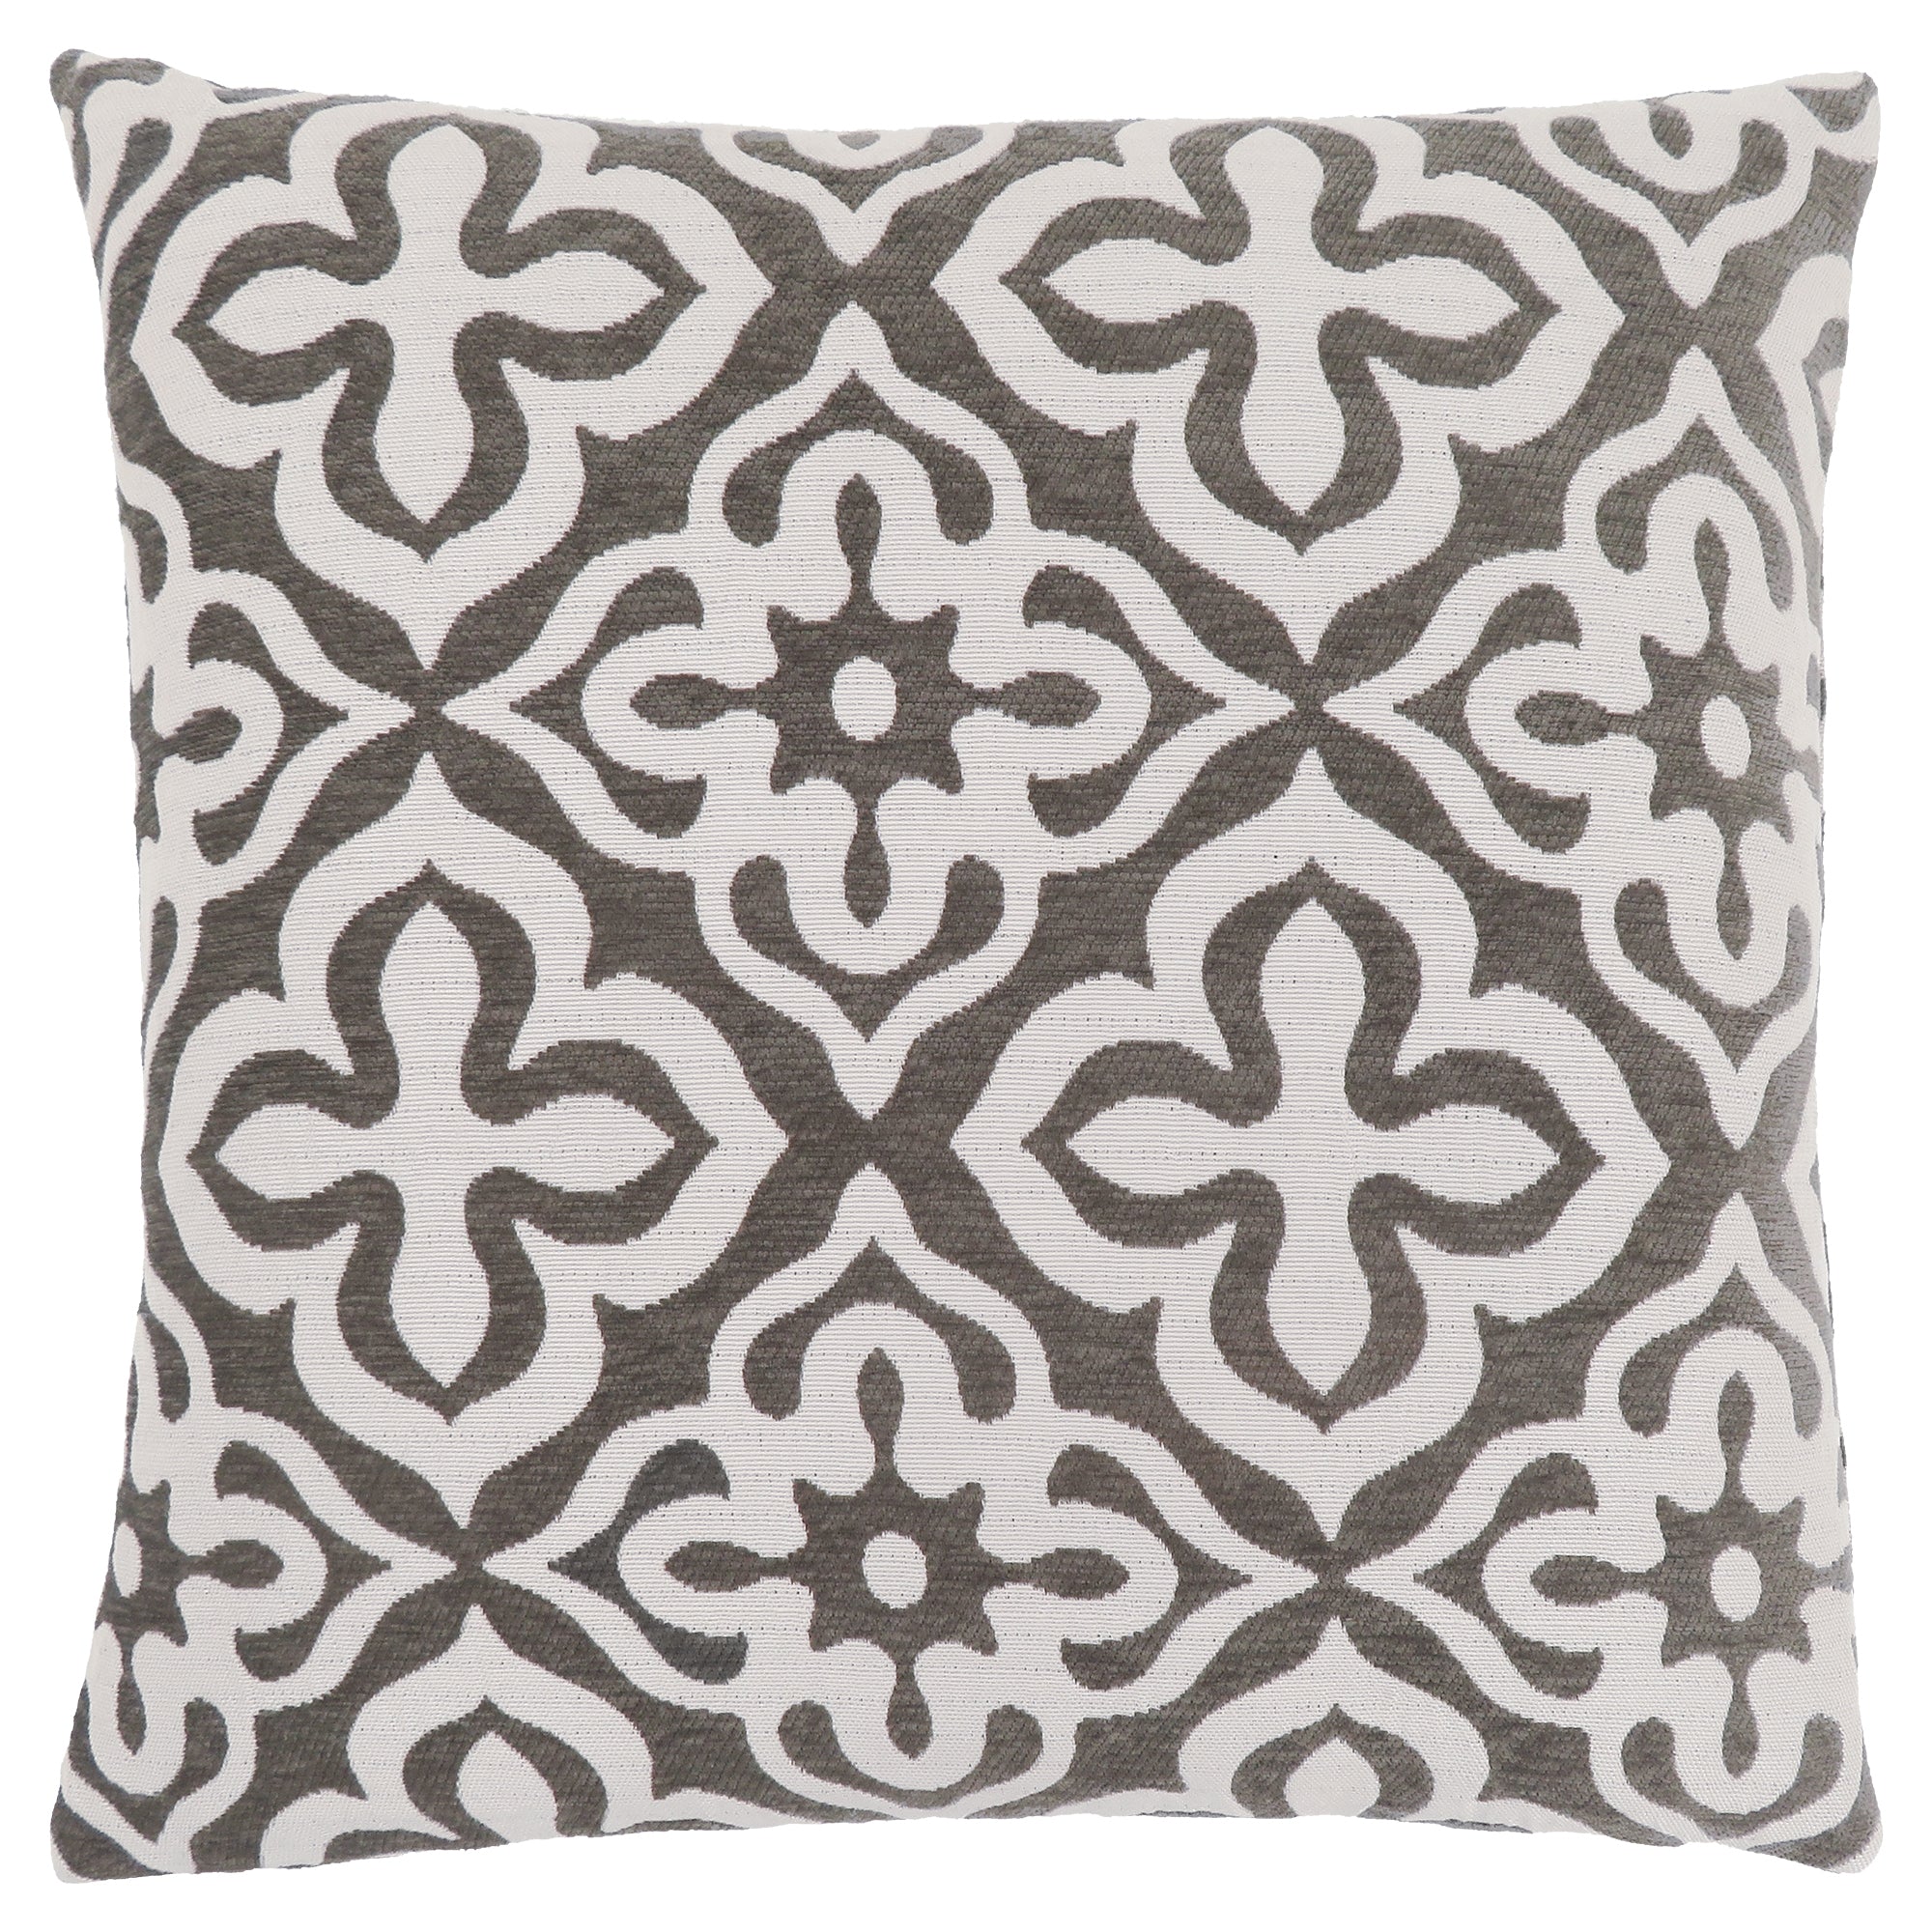 MN-369216    Pillows, 18 X 18 Square, Insert Included, Decorative Throw, Accent, Sofa, Couch, Bed, Soft Polyester Woven Fabric, Hypoallergenic Soft Polyester Insert, Dark Taupe, Motif Design, Contemporary, Modern